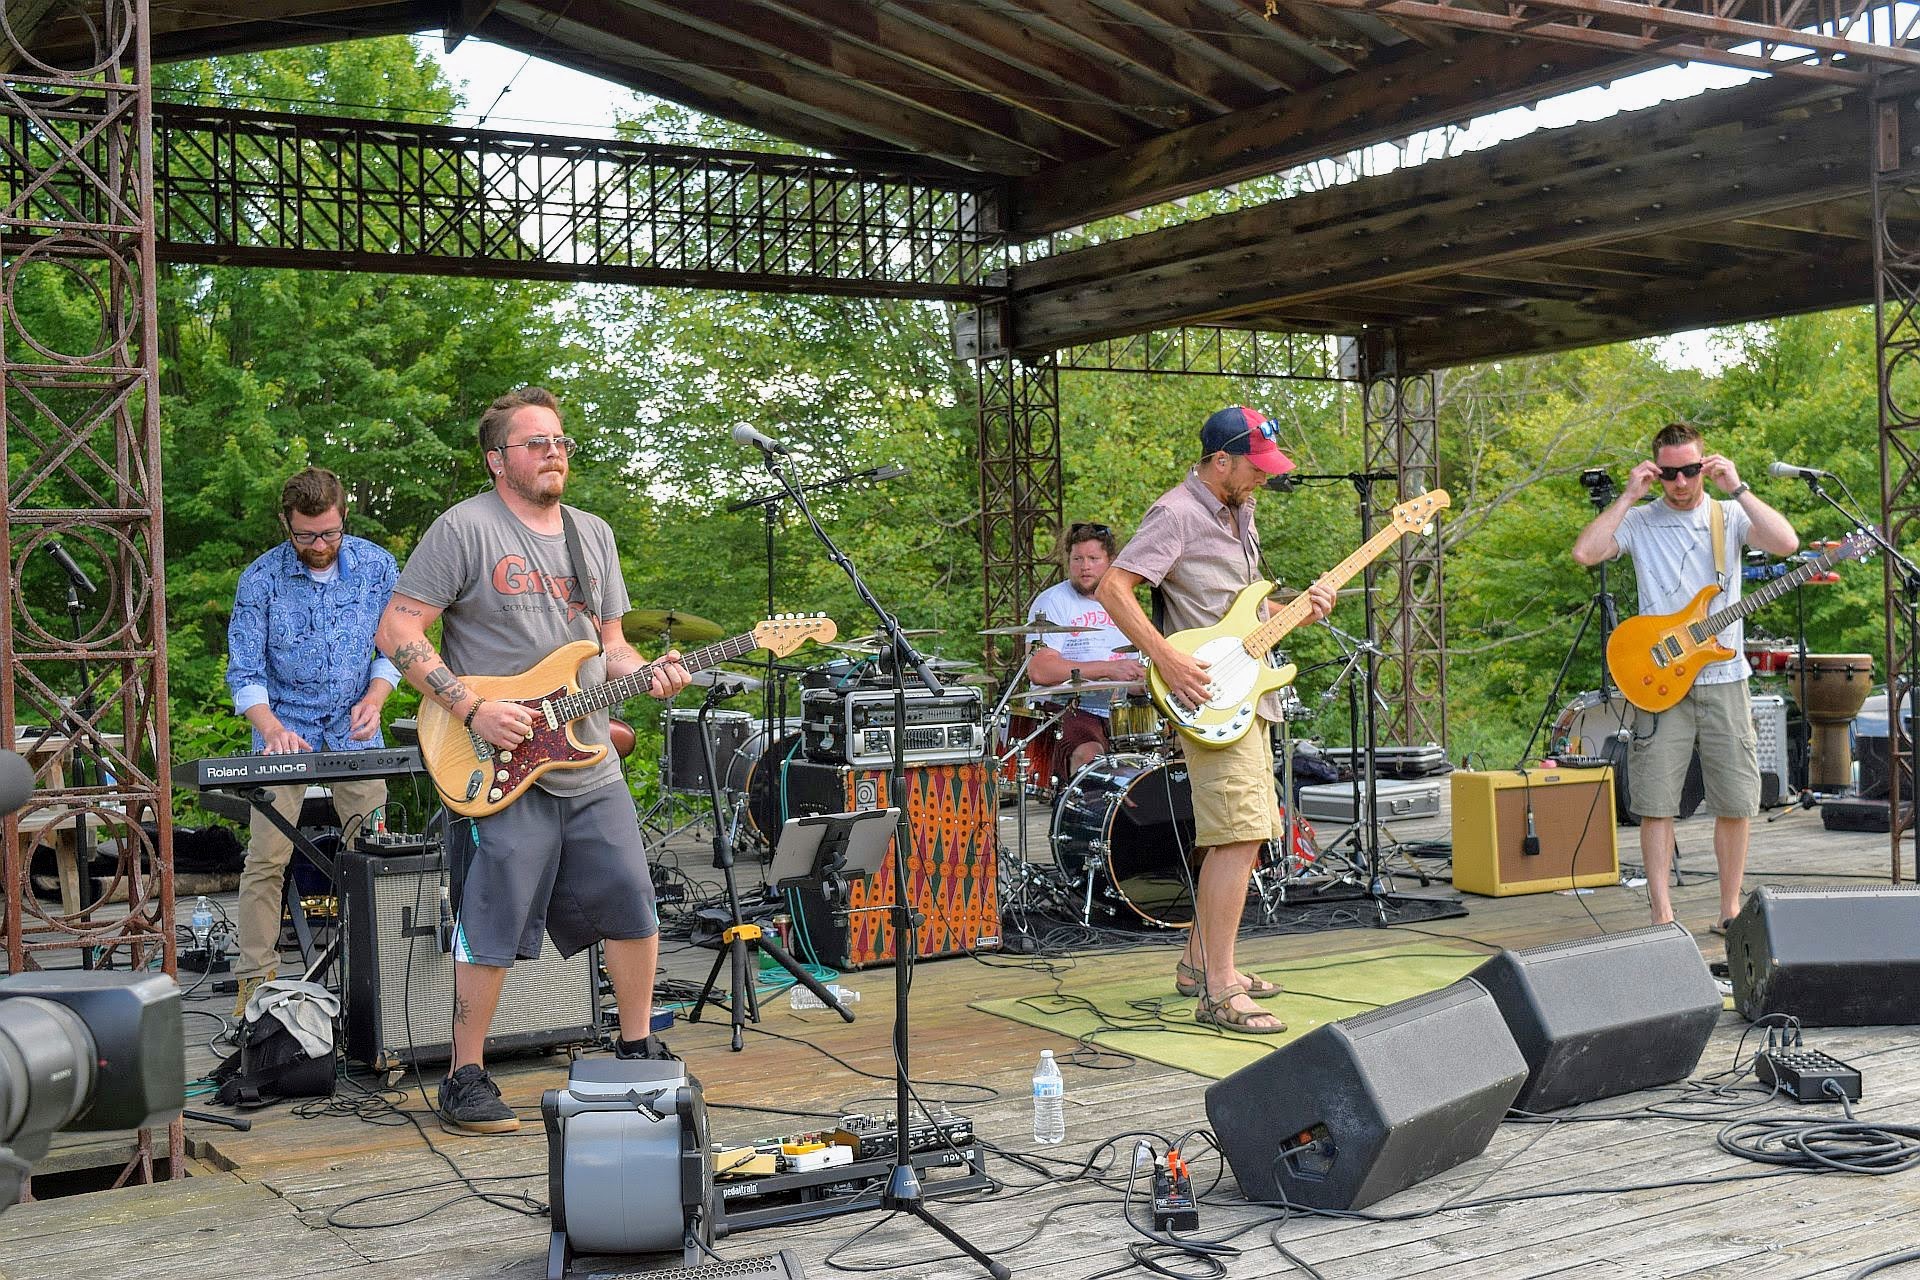 Photos from 7th Annual Griffis Sculpture Park Summer Festival